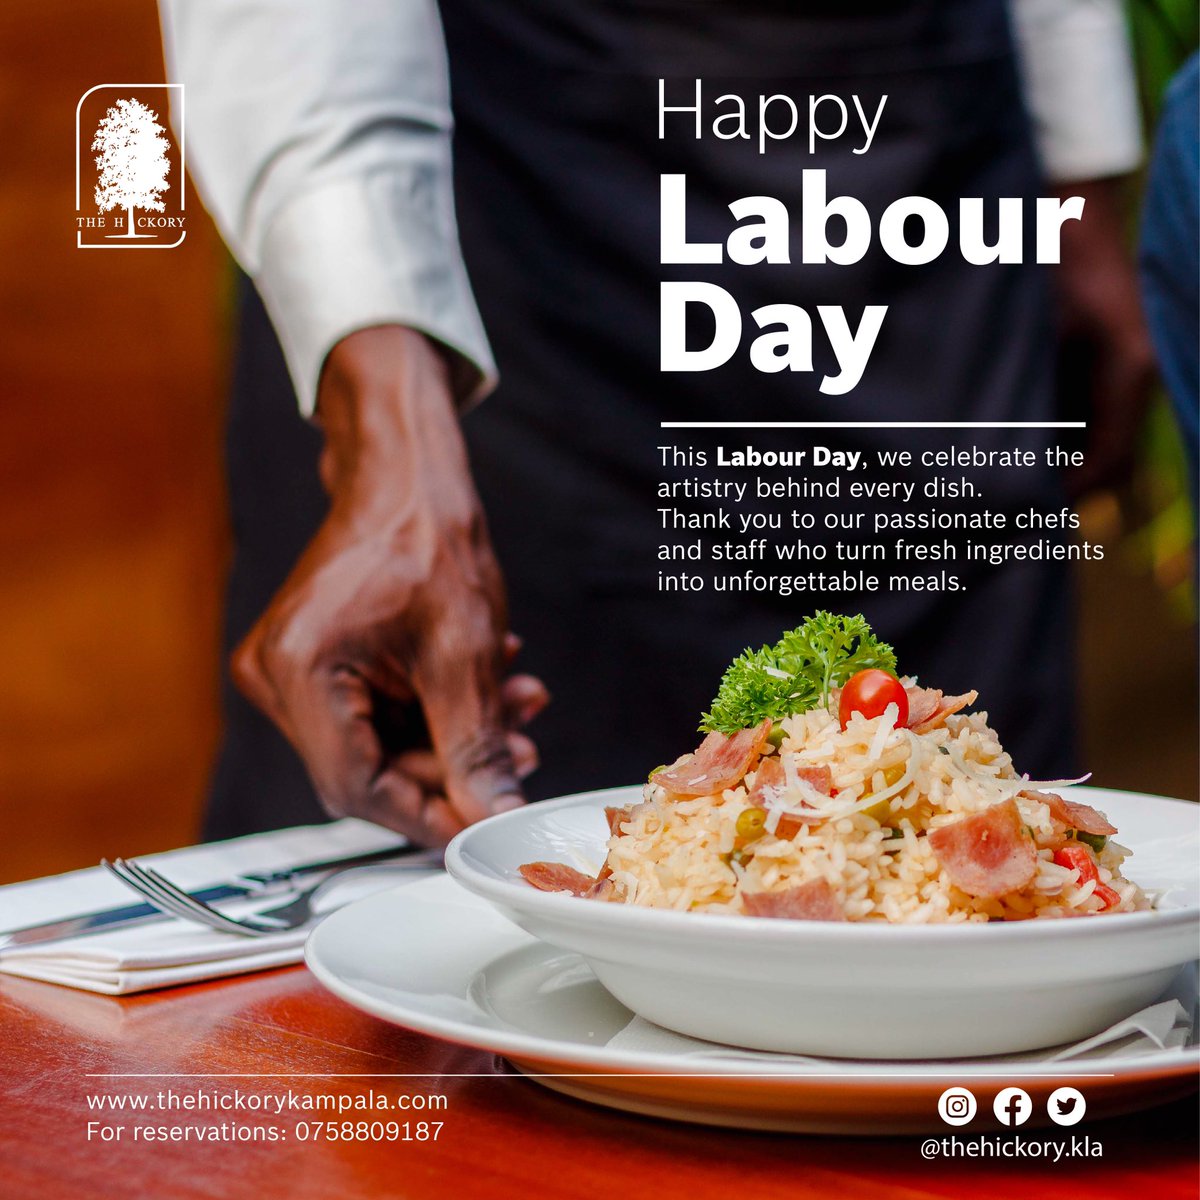 We celebrate the artistry behind every dish we serve at #TheHickory. Thank you to our passionate chefs and staff who turn fresh ingredients into unforgettable meals. Happy Labour Day. #InternationalLabourDay